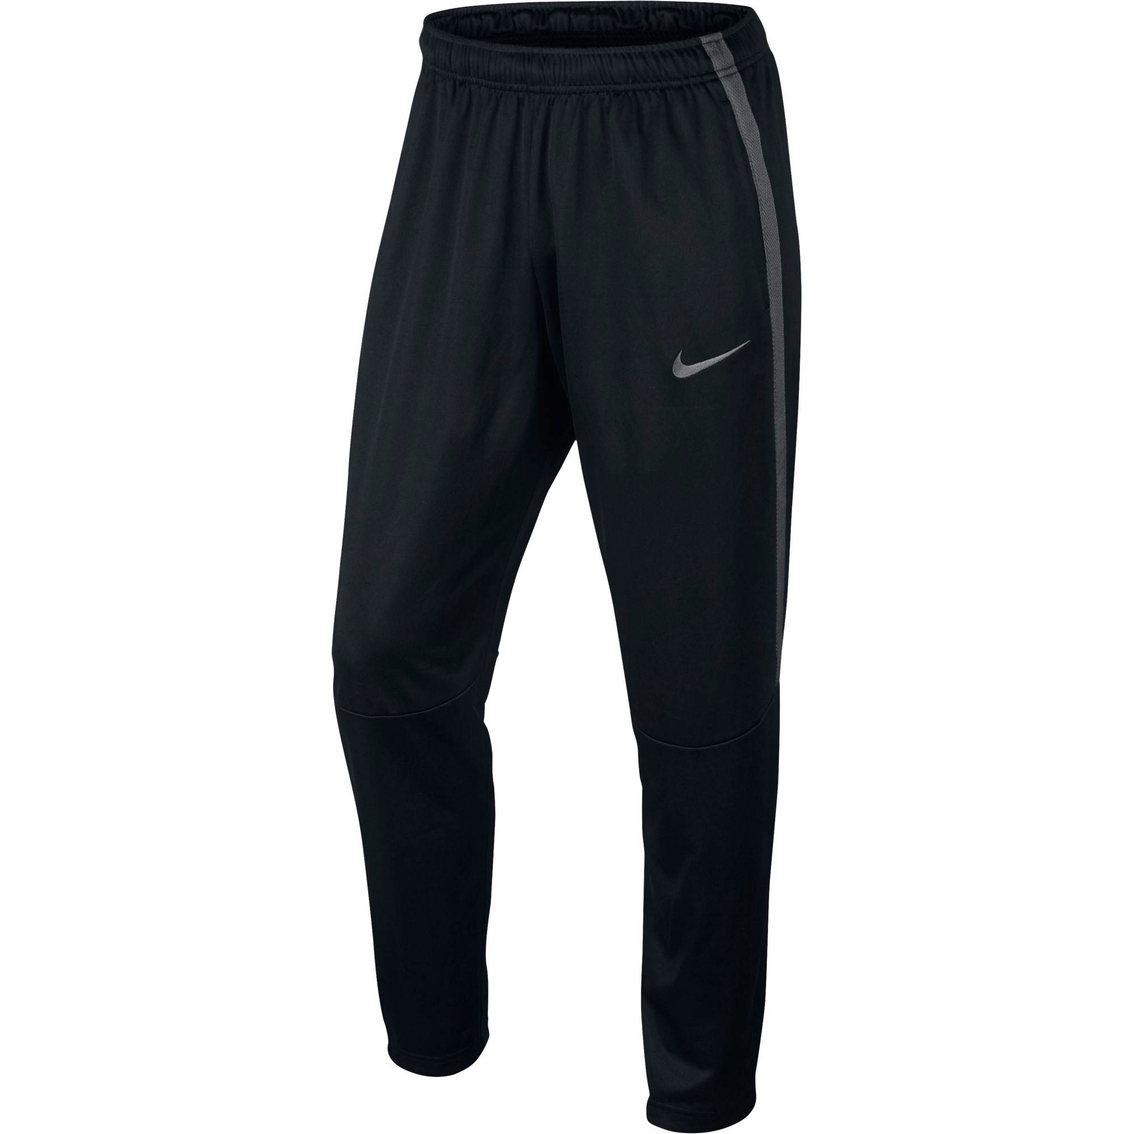 Nike Epic Pants, Pants, Clothing & Accessories